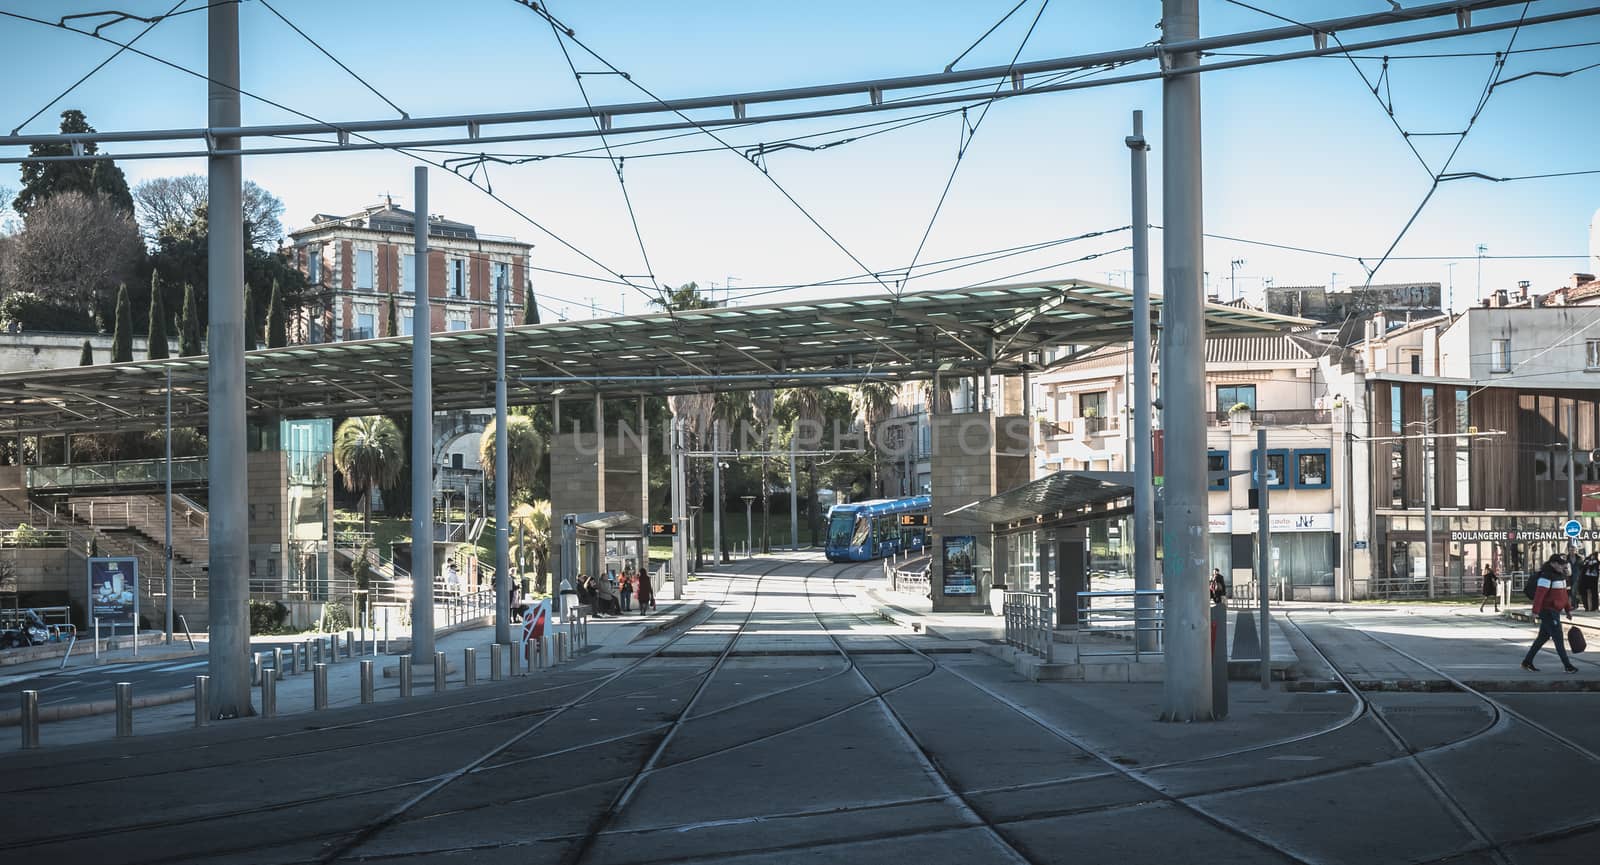 electric tramway passing the Corum, a convention center and Oper by AtlanticEUROSTOXX